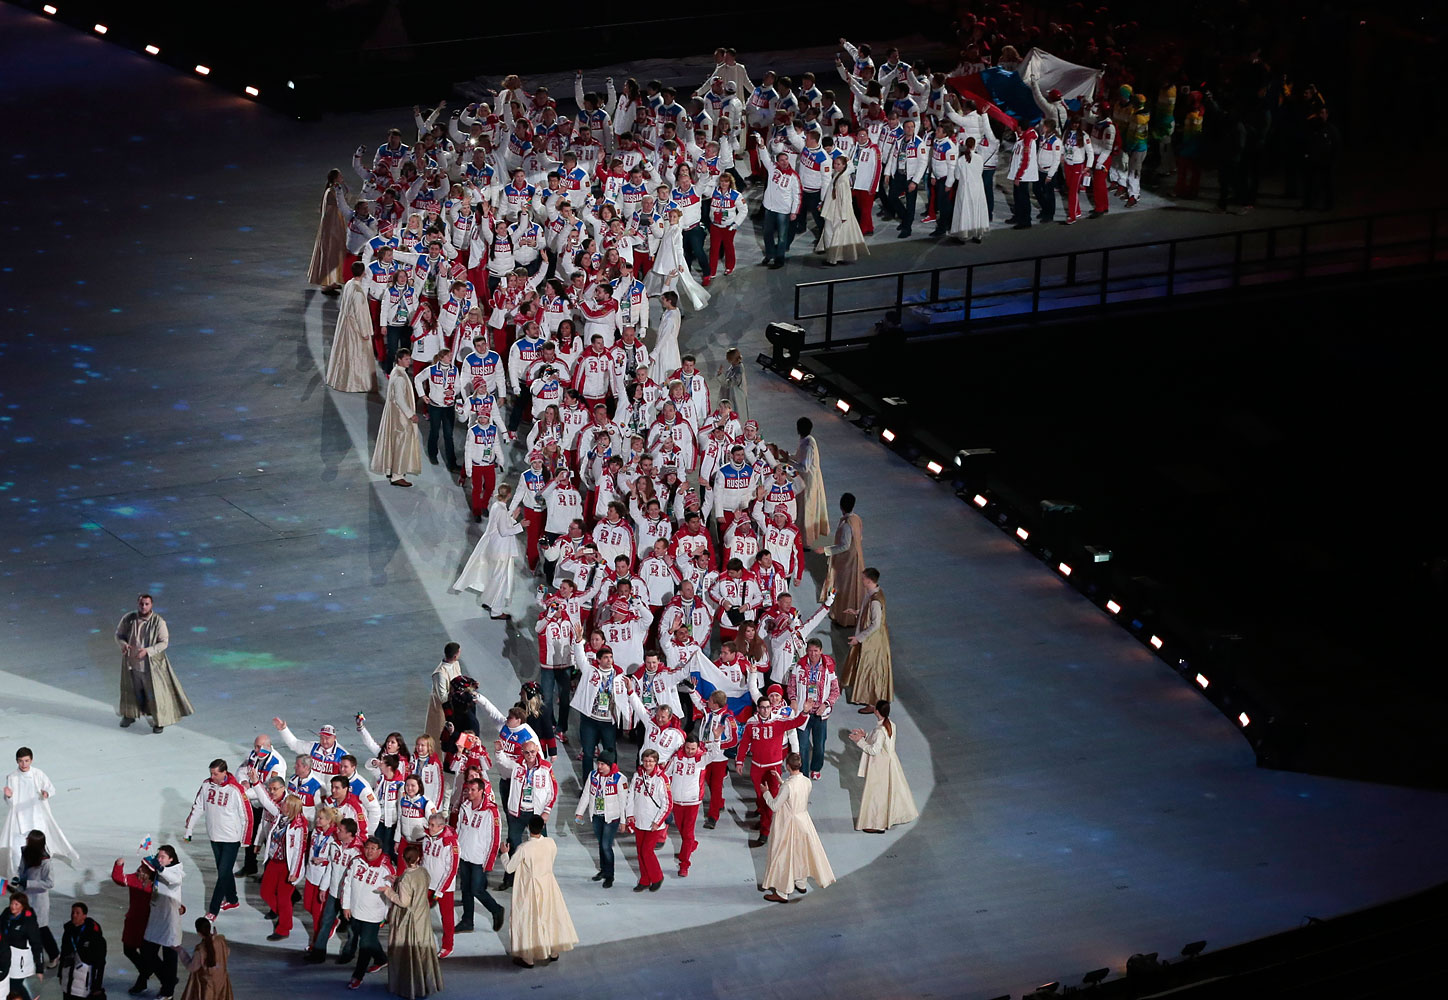 Members of the Russian Olympic team walk on stage.